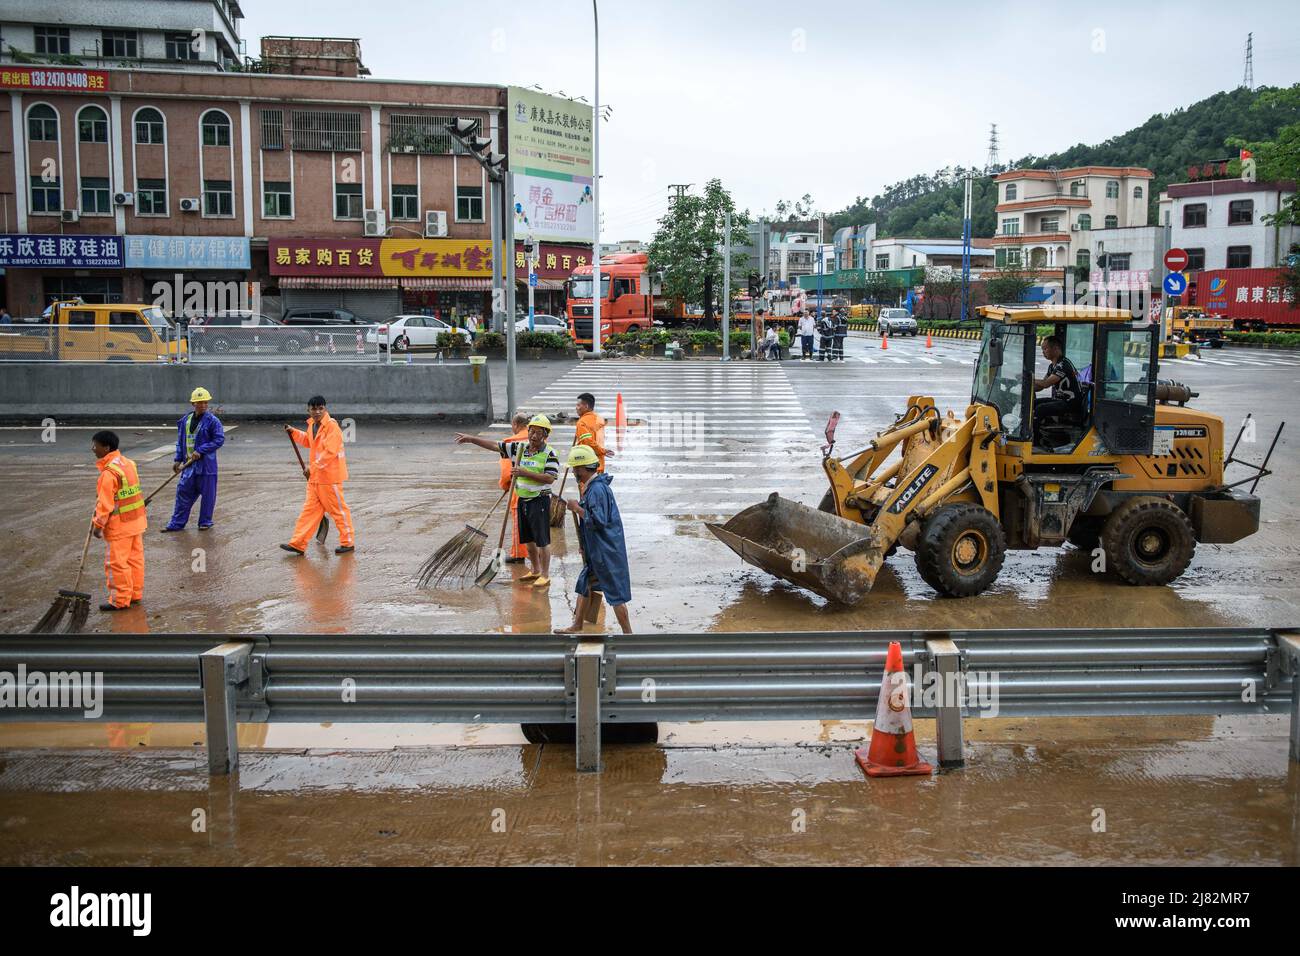 ZHONGSHAN, CHINA - MAY 12, 2022 - Cleaners clean a muddy street after a rainstorm in Zhongshan, Guangdong Province, China, May 12, 2022. Stock Photo